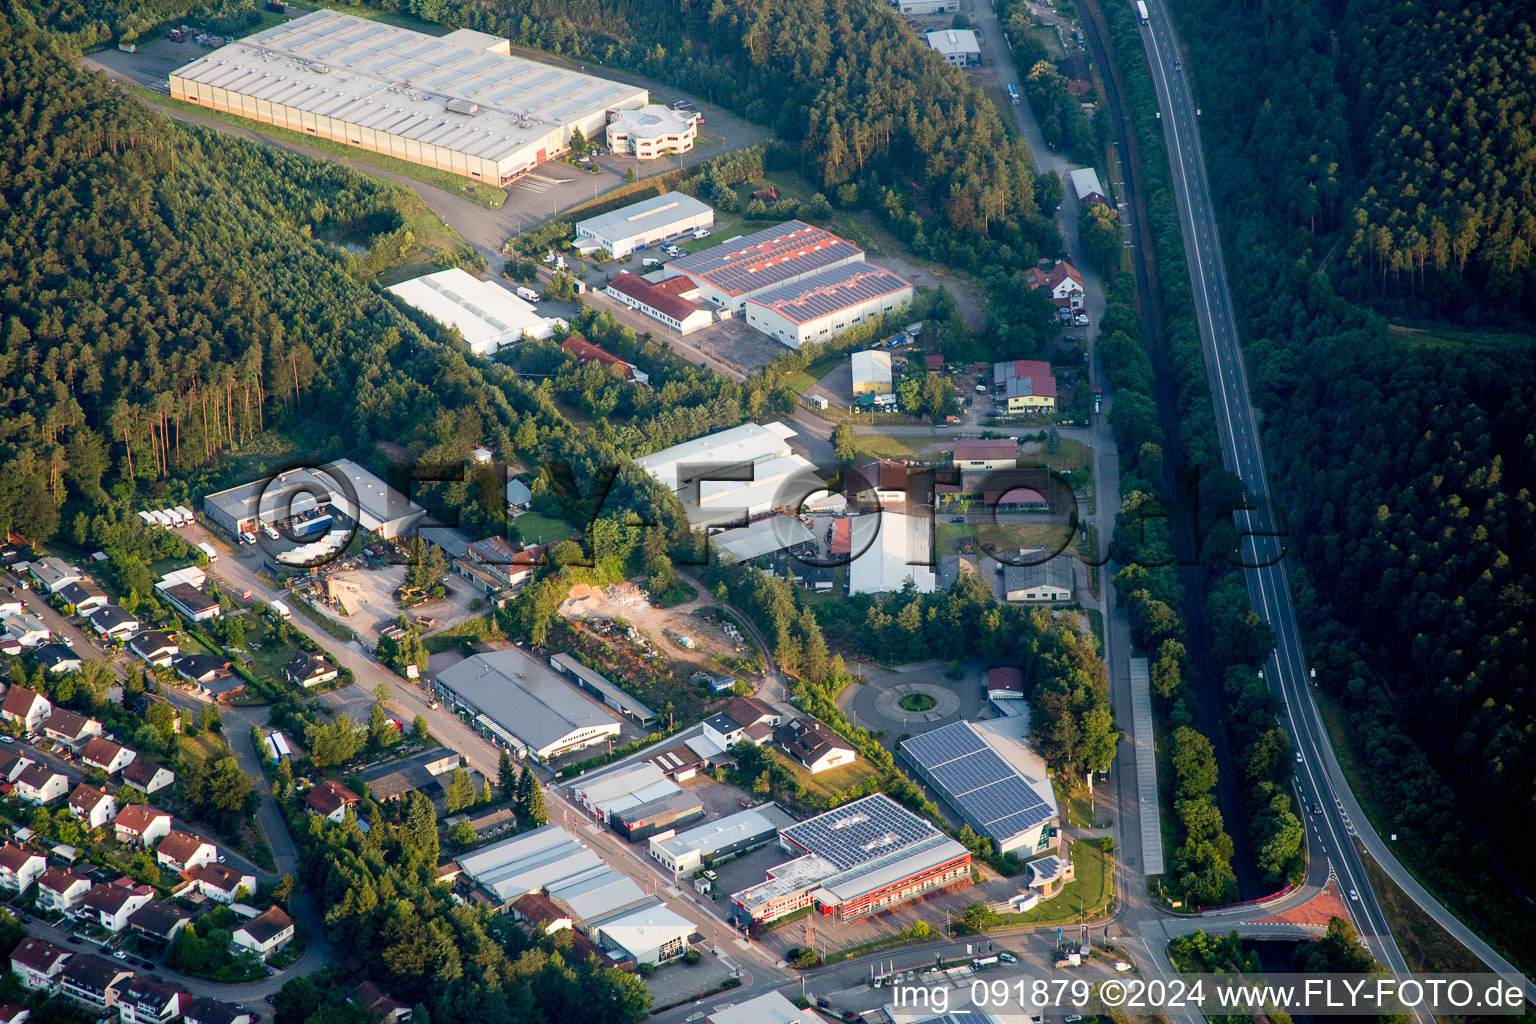 Aerial view of Building and production halls on the premises of Josef Seibel Schuhfabrik GmbH in Hauenstein in the state Rhineland-Palatinate, Germany